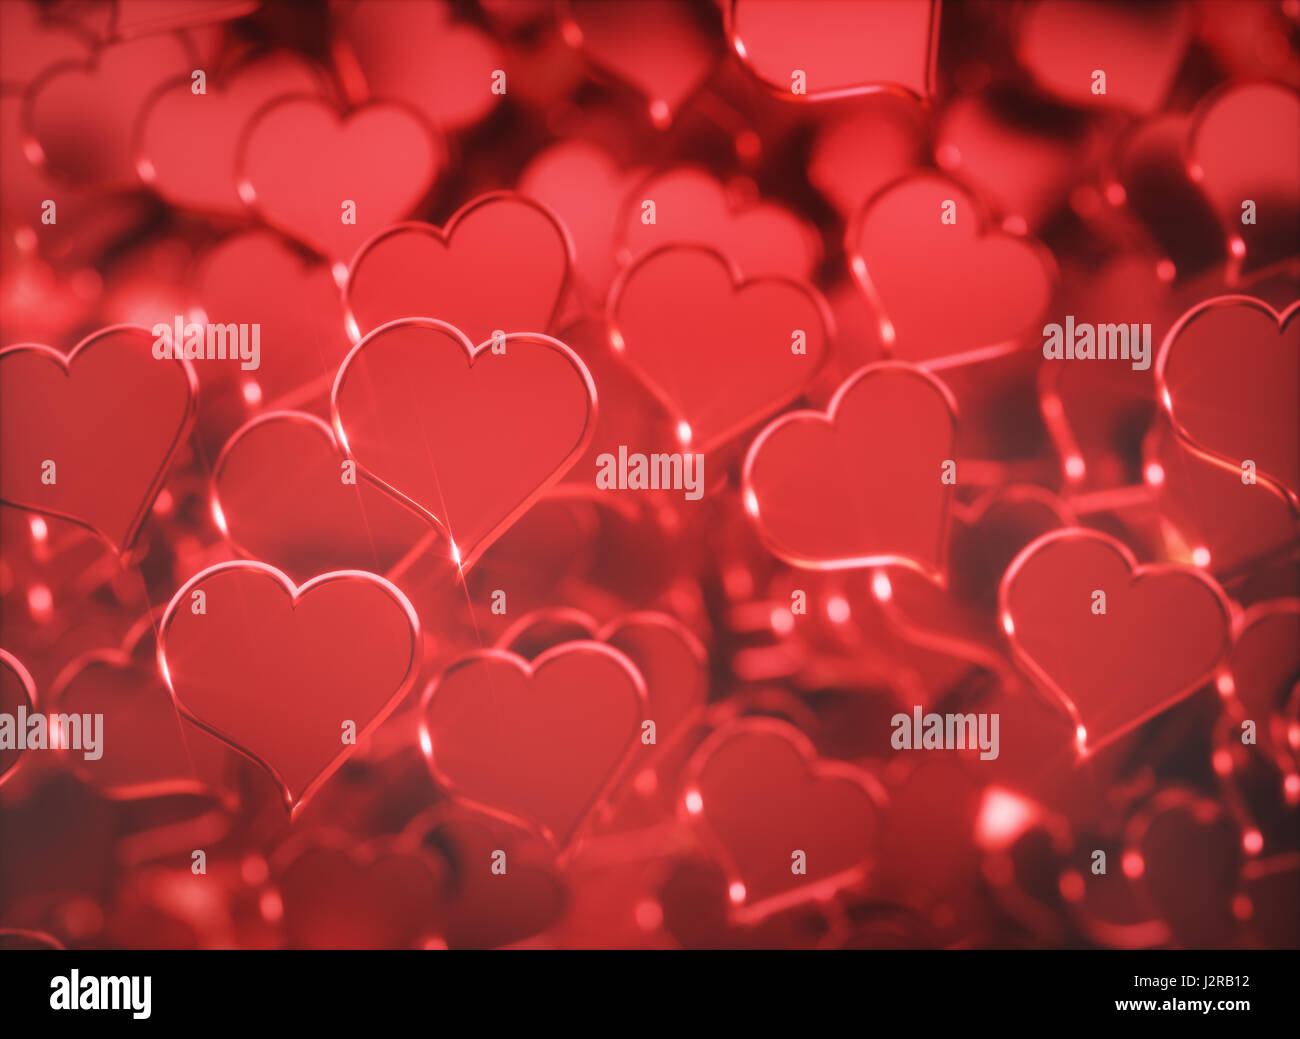 3D illustration. Background image with red heart balloons. Image with depth of field. Stock Photo